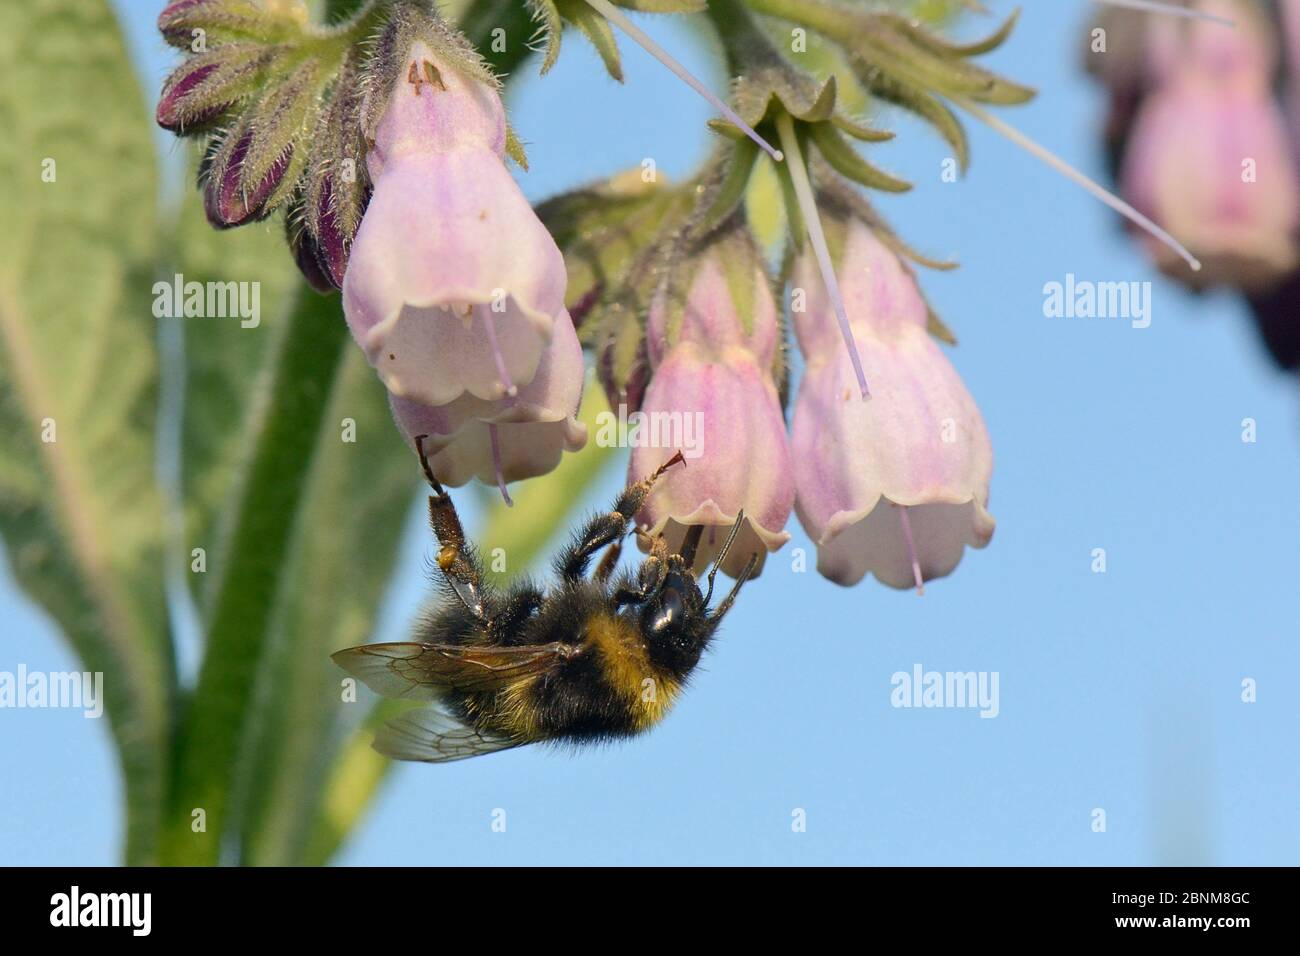 Garden bumblebee (Bombus hortorum) worker nectars on Common comfrey flowers (Symphytum officinale) in a patch planted by the Bumblee Conservation Trus Stock Photo